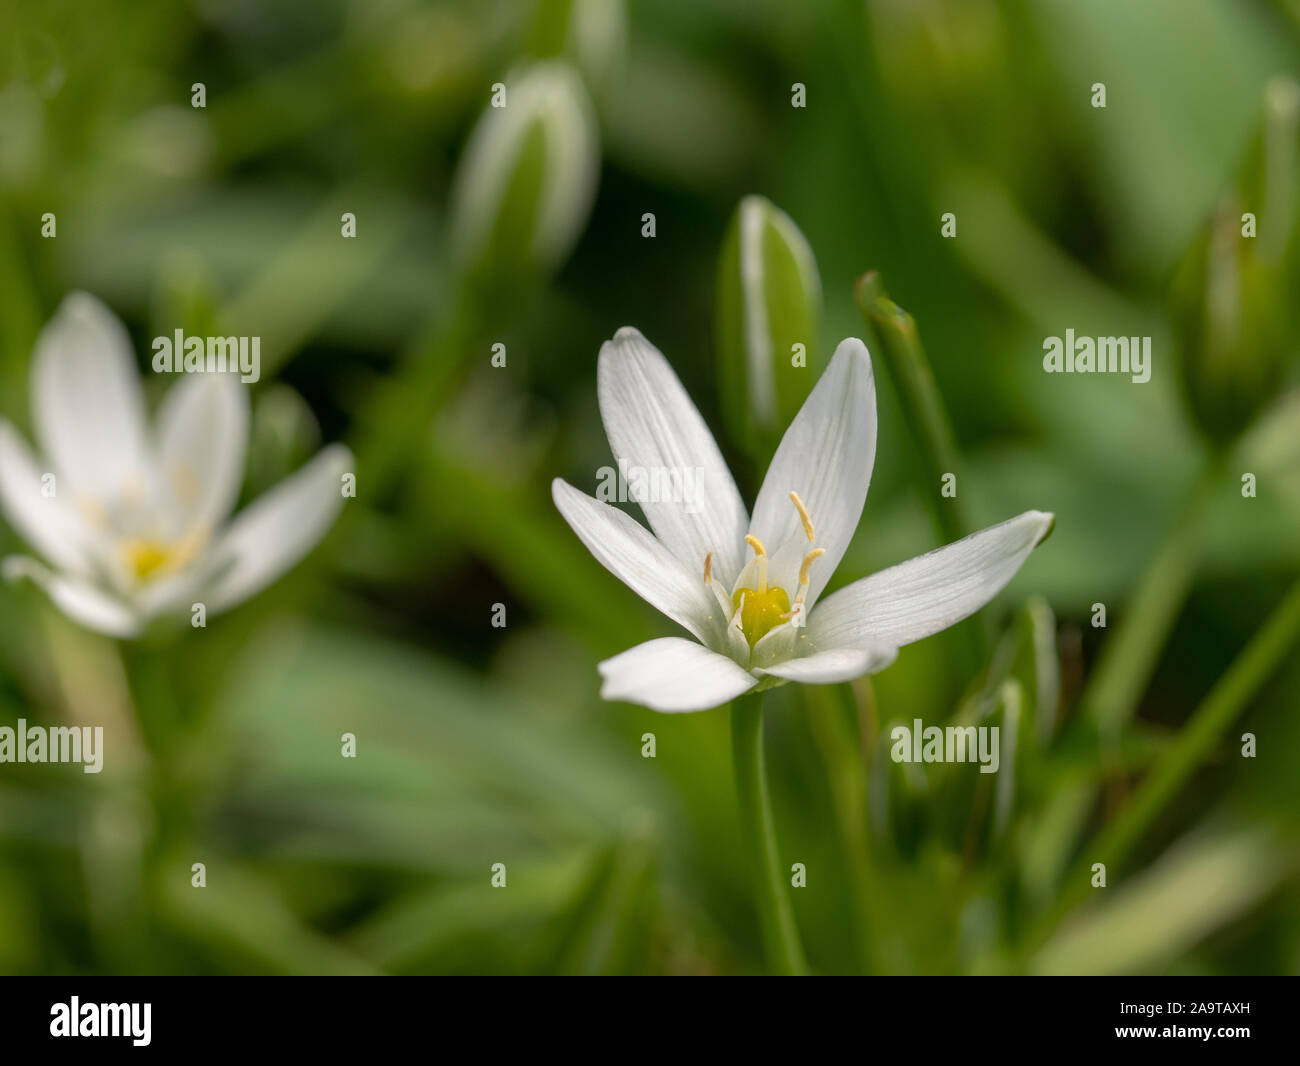 Garden star of Bethlehem white flowers growing from flower bulbs and blooming in the spring Stock Photo